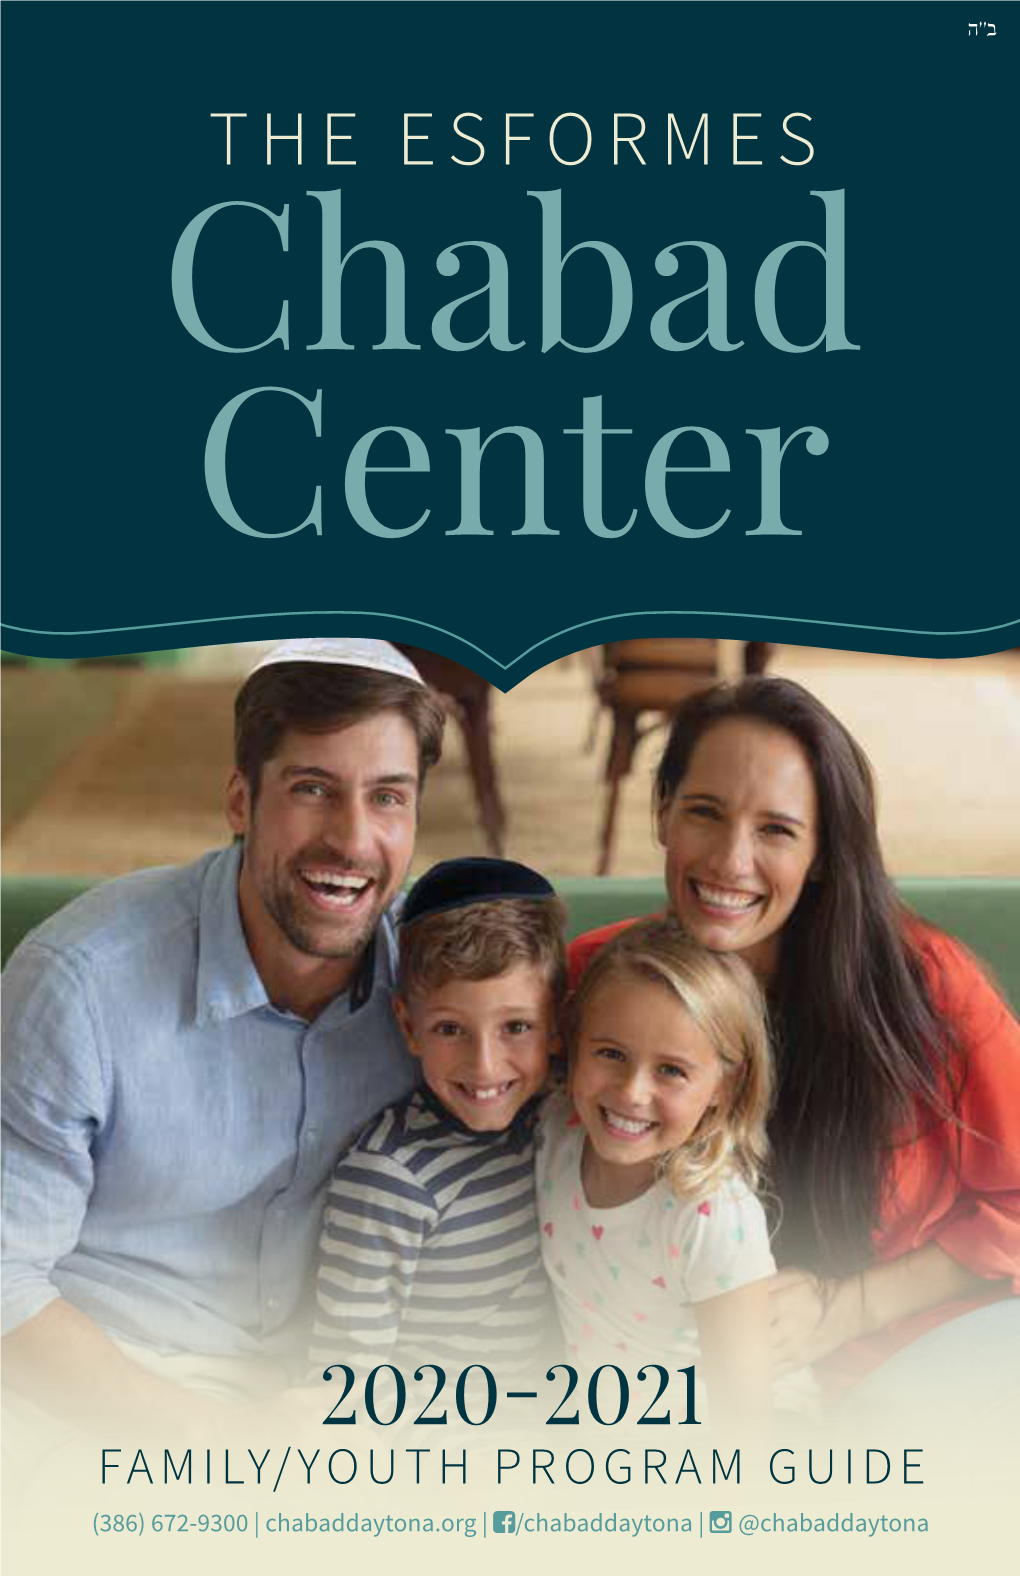 THE ESFORMES Chabad Center